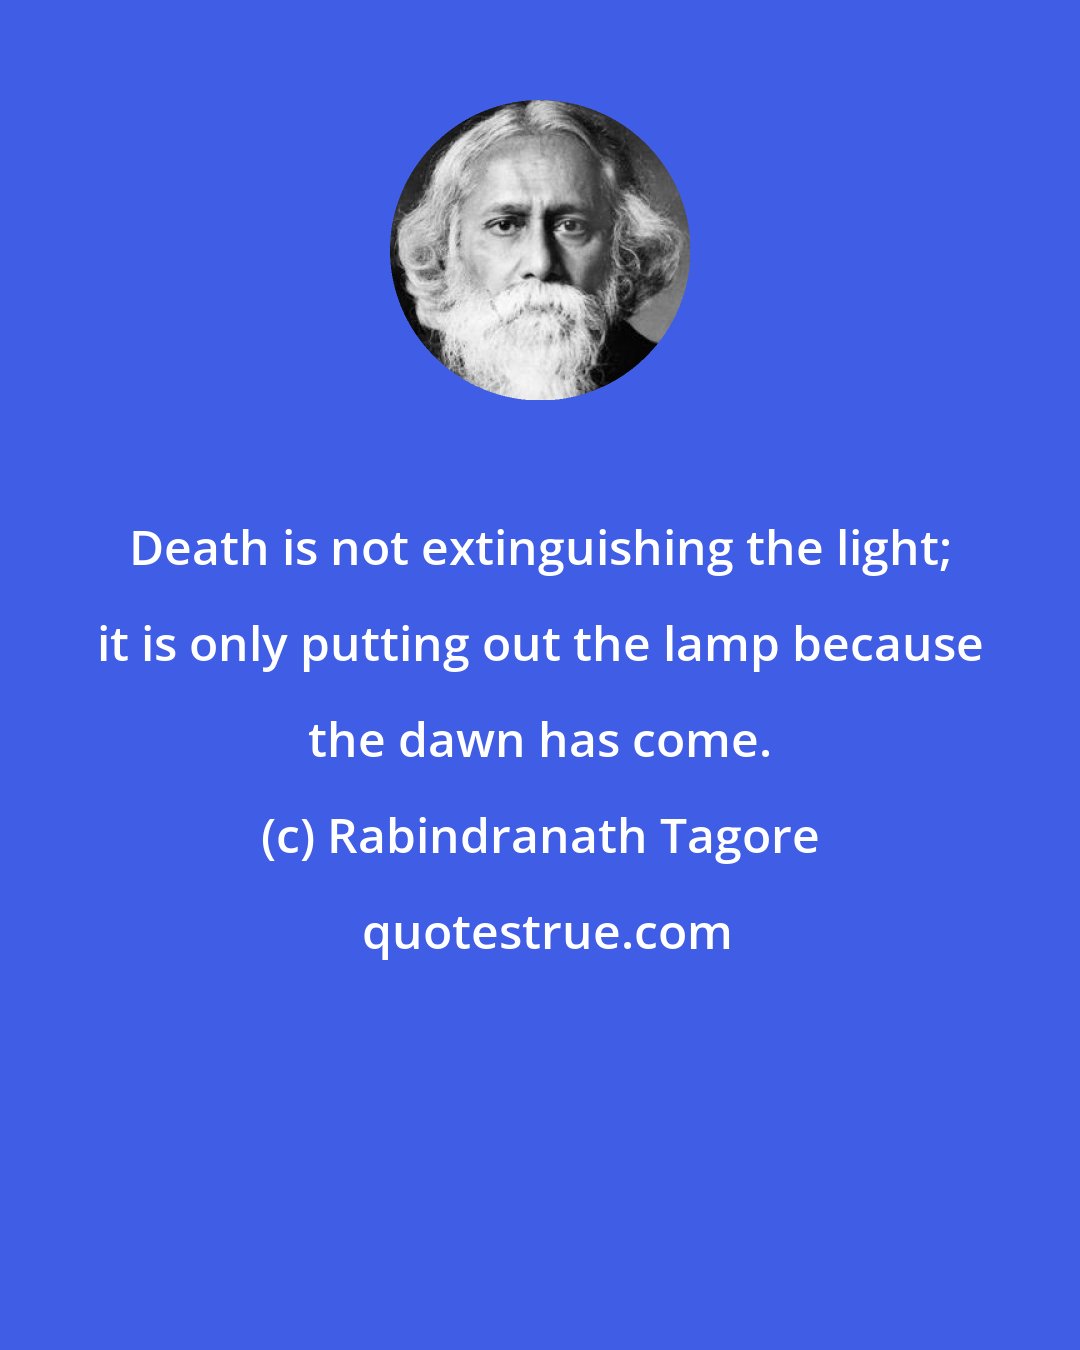 Rabindranath Tagore: Death is not extinguishing the light; it is only putting out the lamp because the dawn has come.